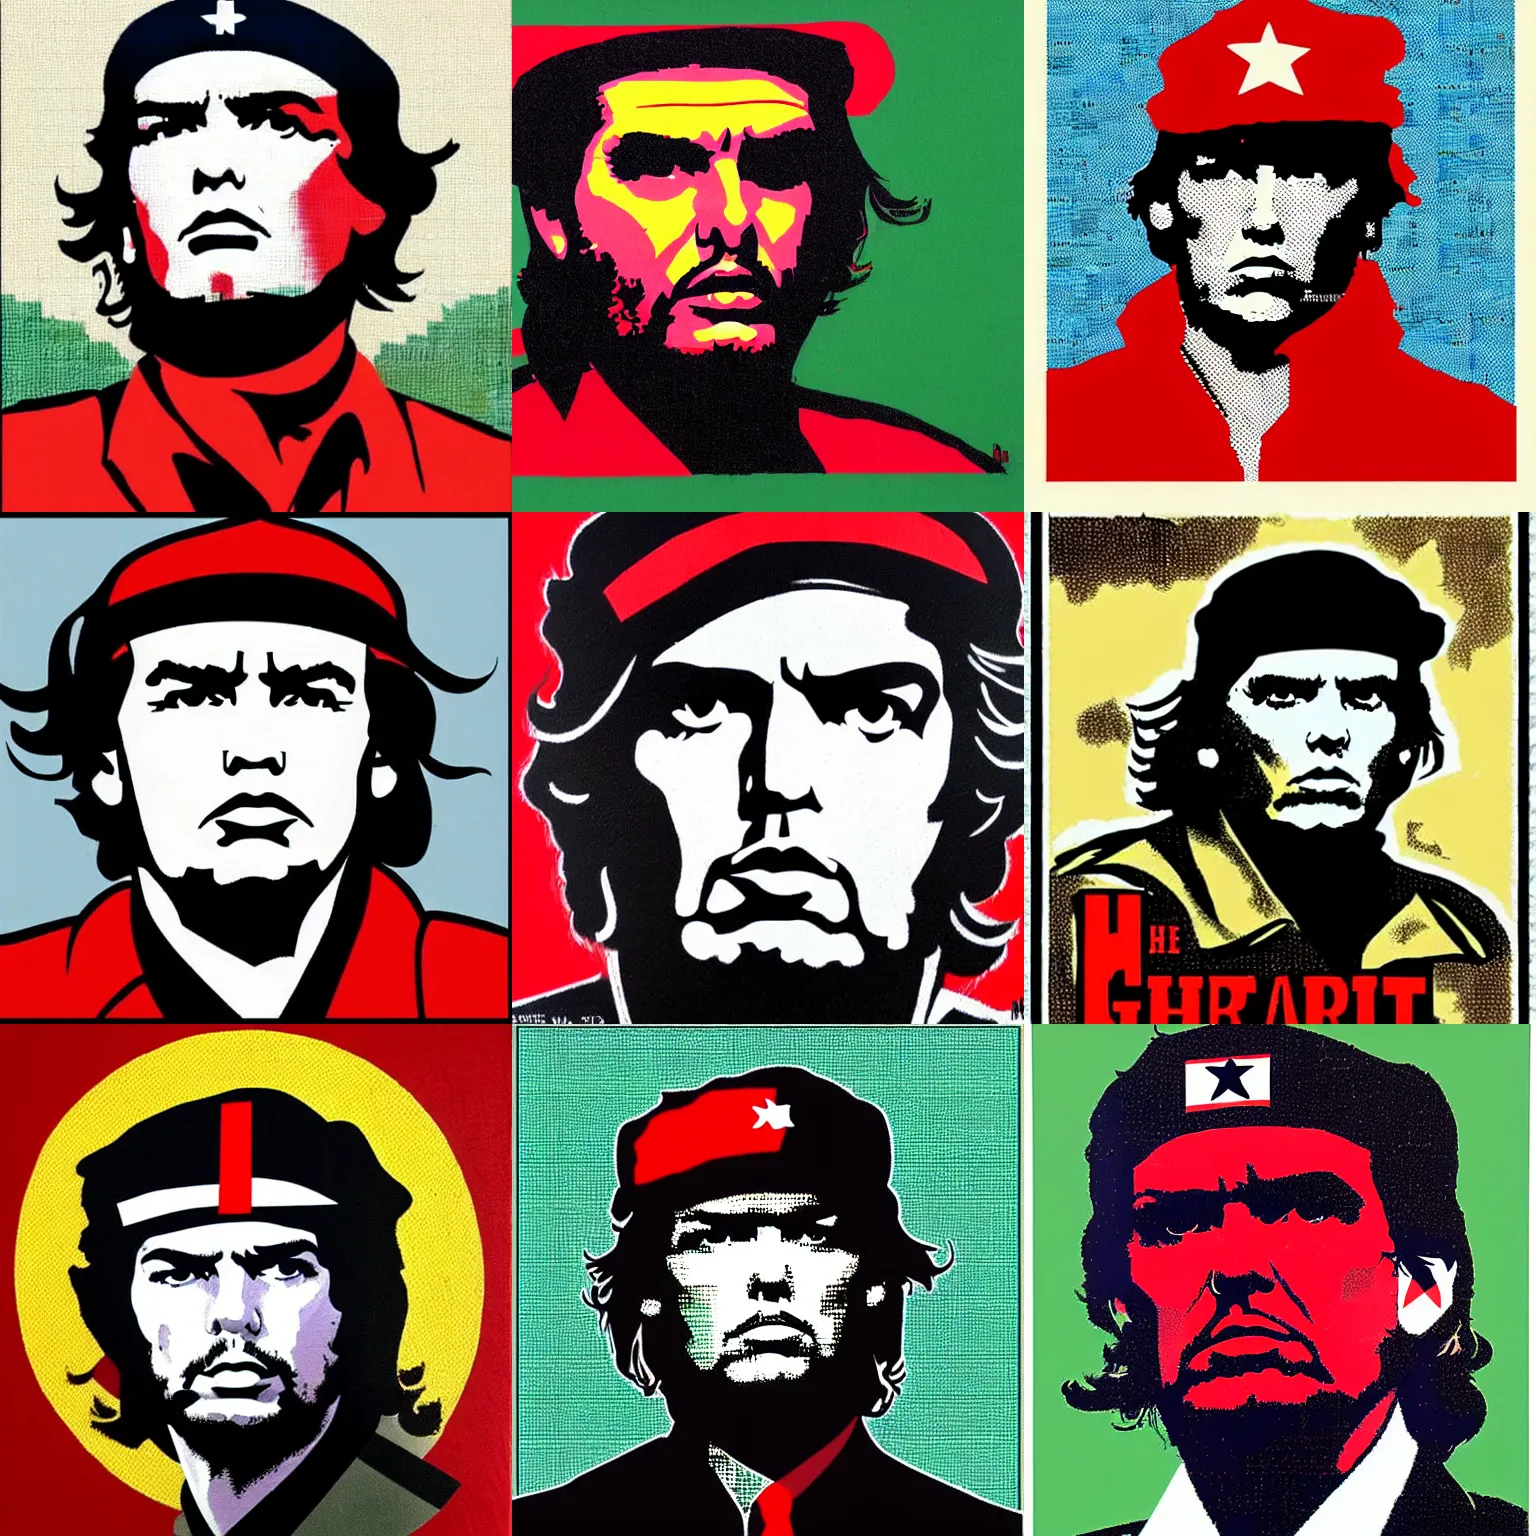 Prompt: guerrillero heroico, donald trump as the socialist revolutionary che guevara, iconic digit art by jim fitzpatrick